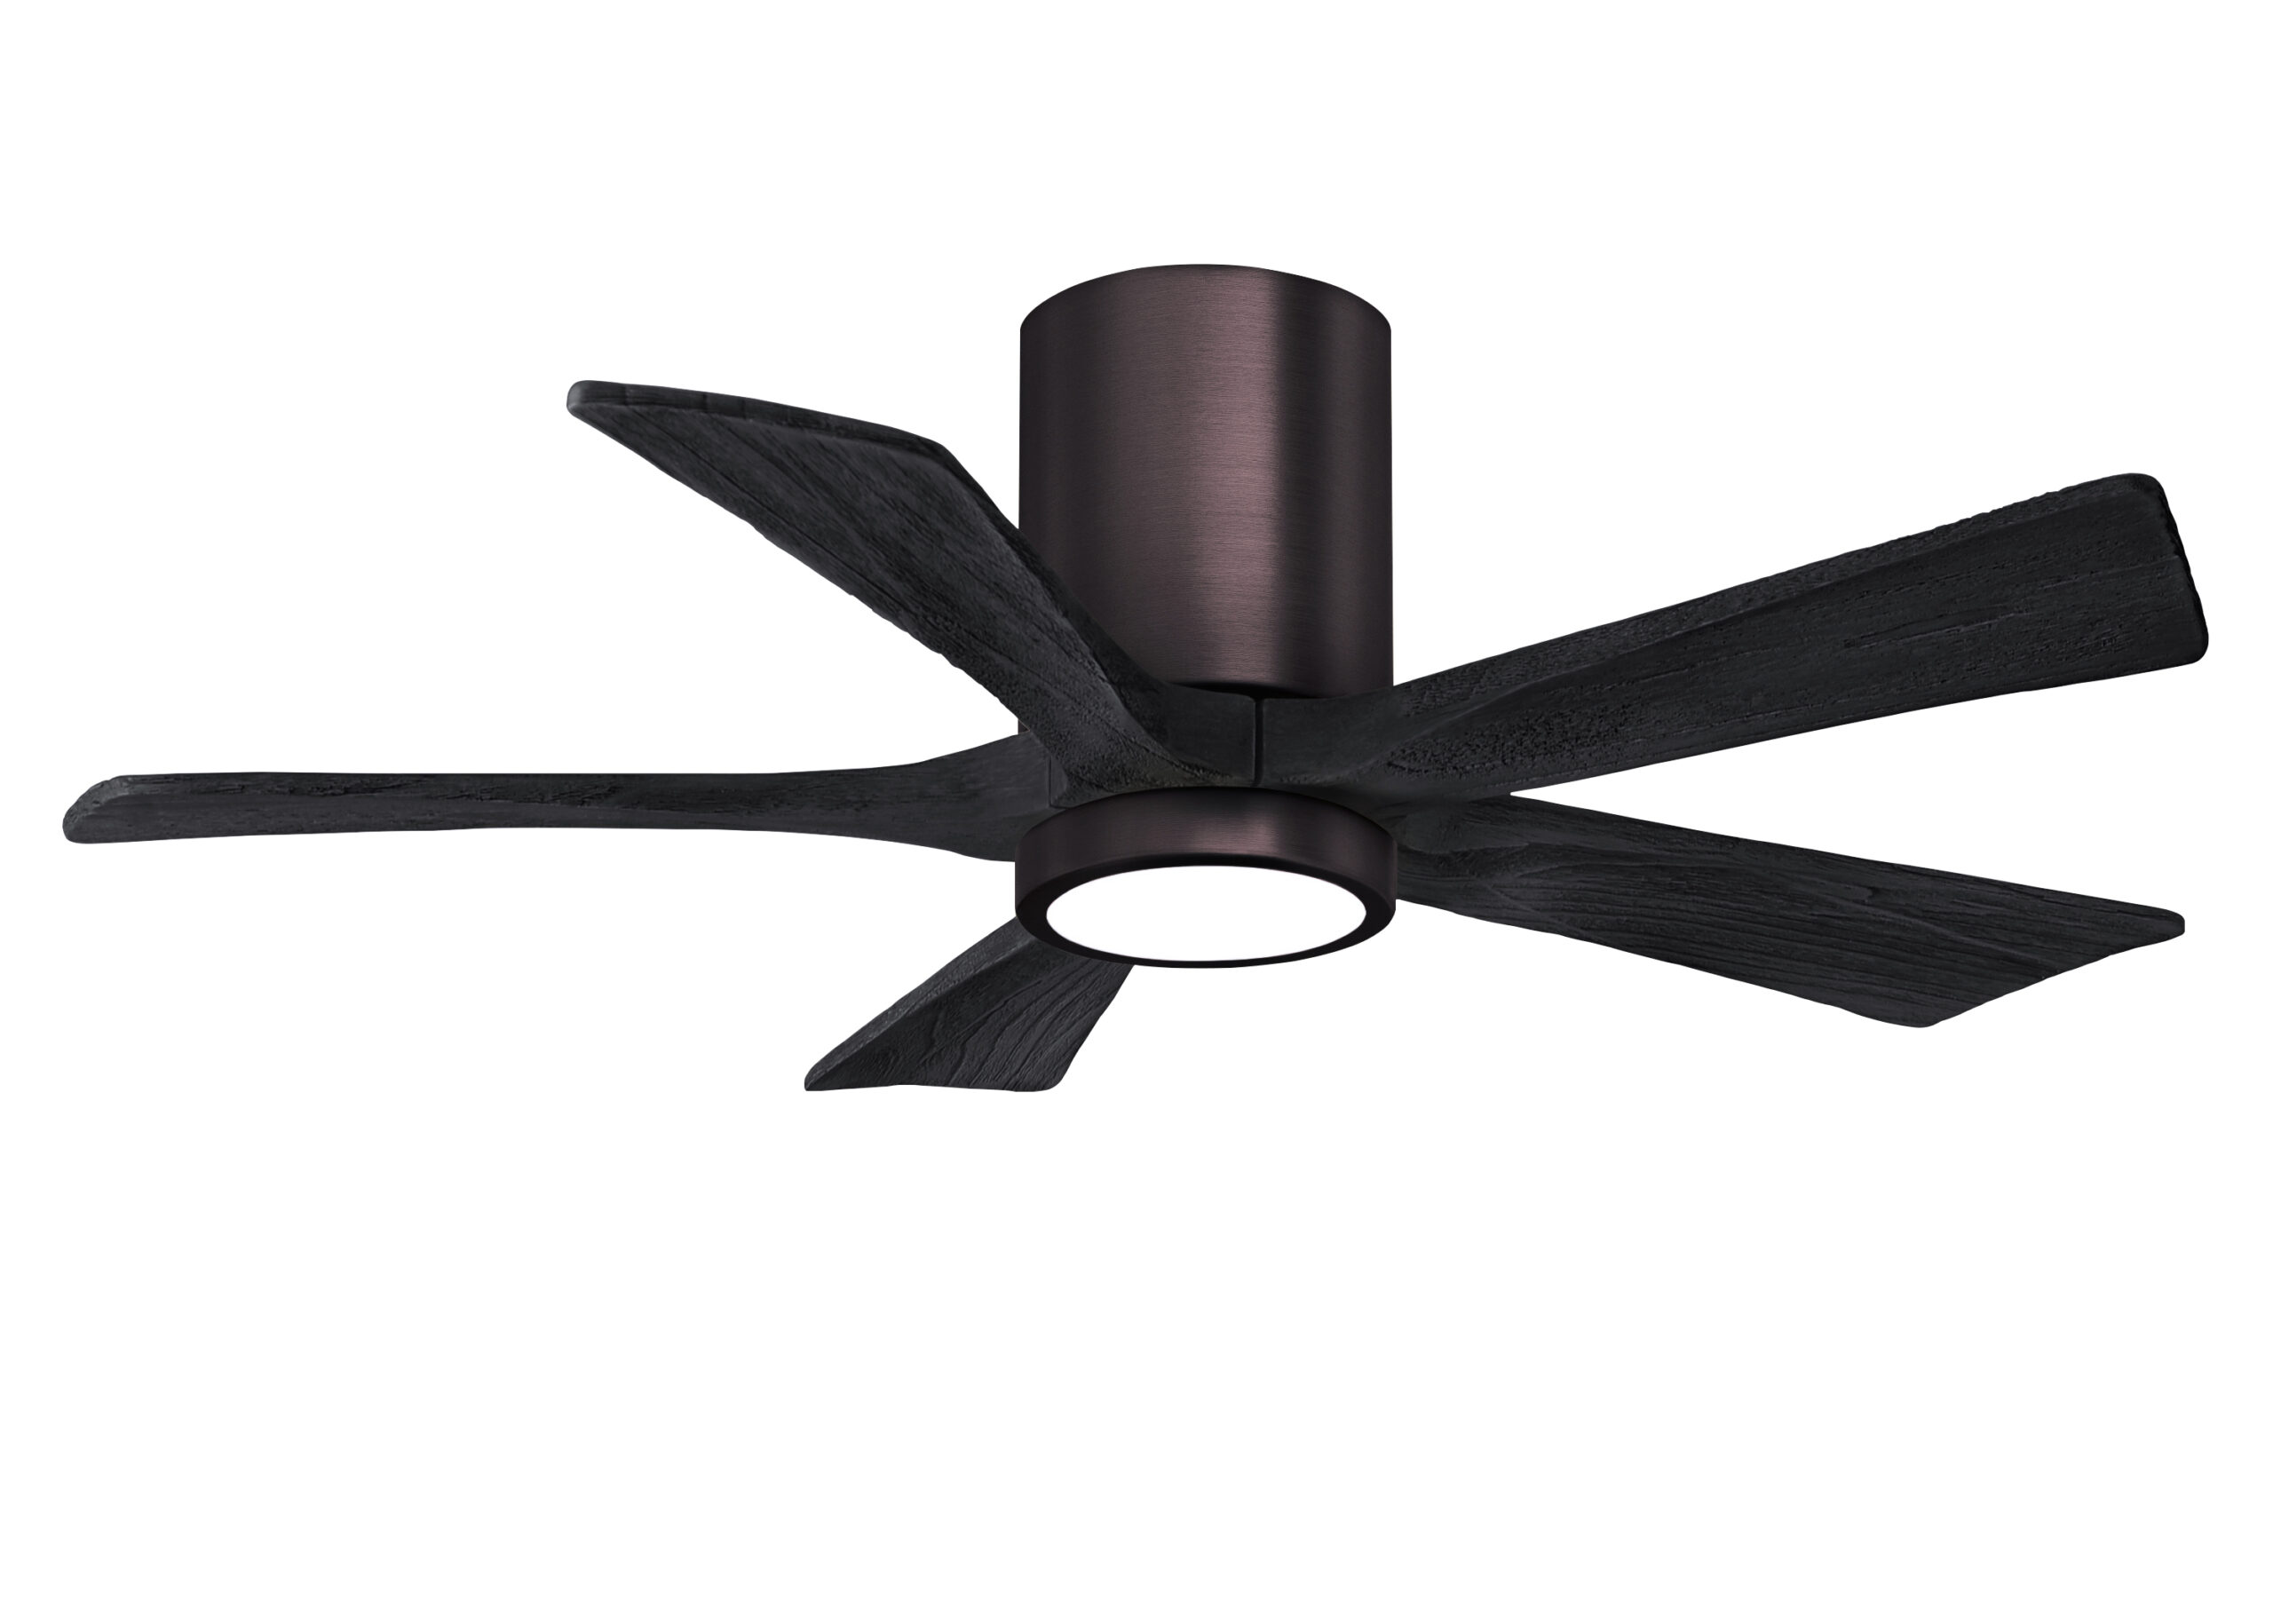 Irene-5HLK Ceiling Fan in Brushed Bronze Finish with 42